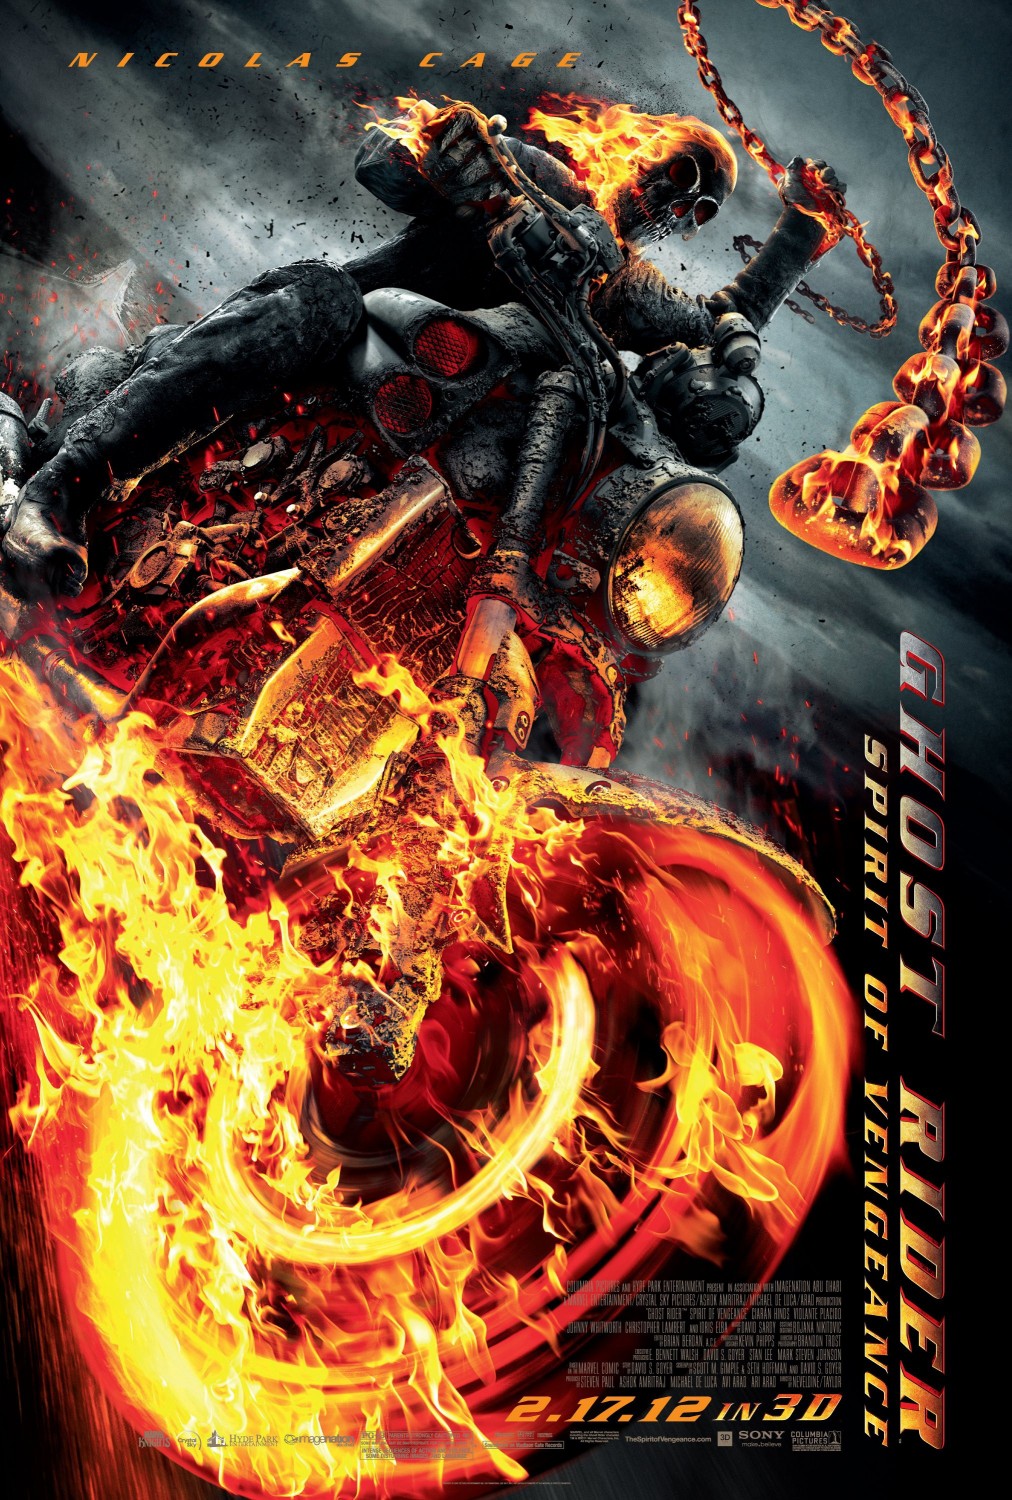 Extra Large Movie Poster Image for Ghost Rider: Spirit of Vengeance (#2 of 7)